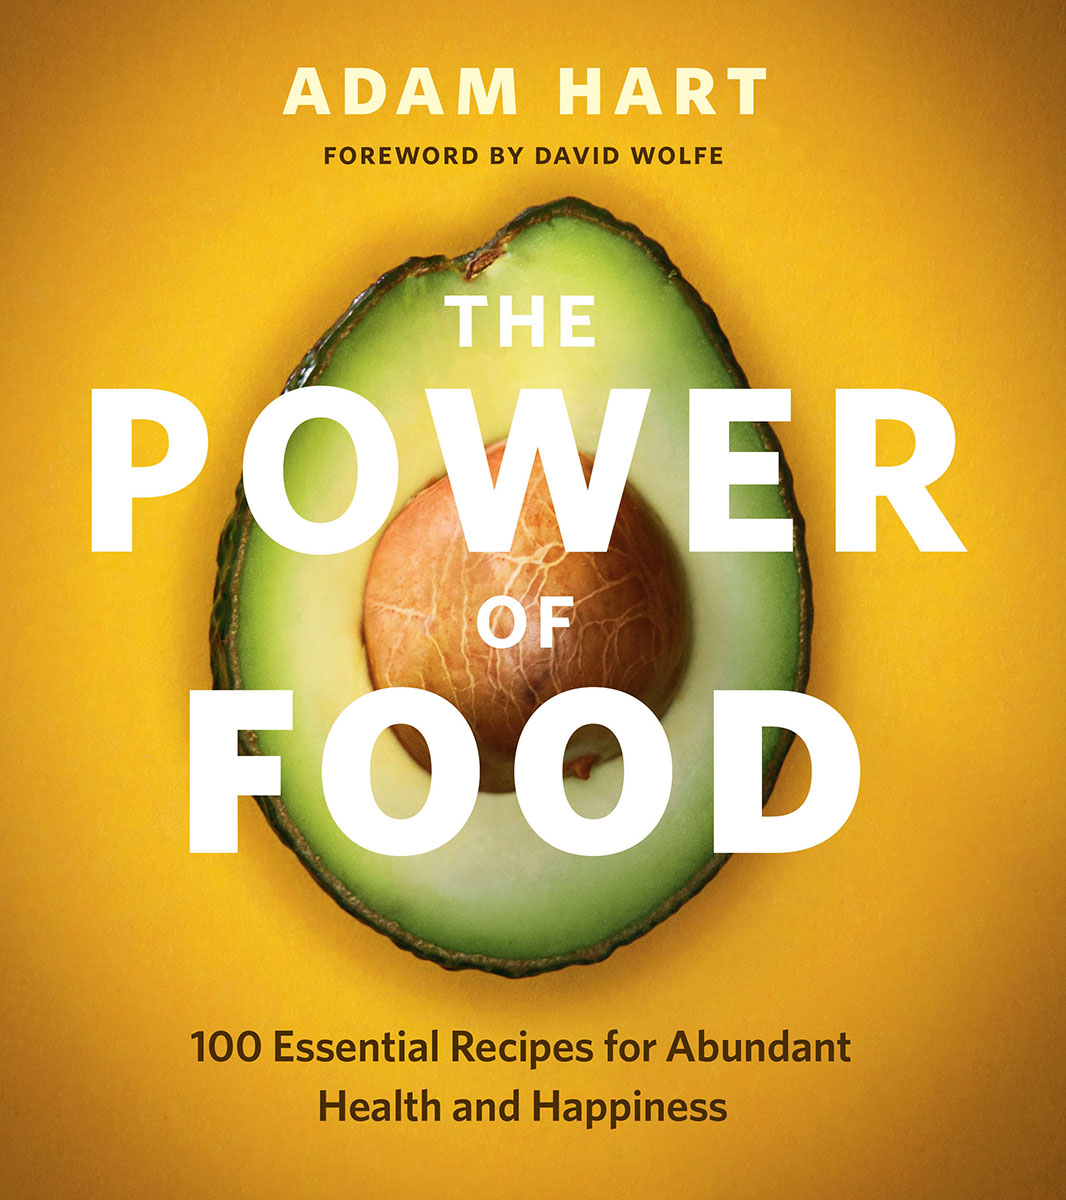 THE POWER OF FOOD Copyright 2013 by Adam Hart Whitecap Books All - photo 1